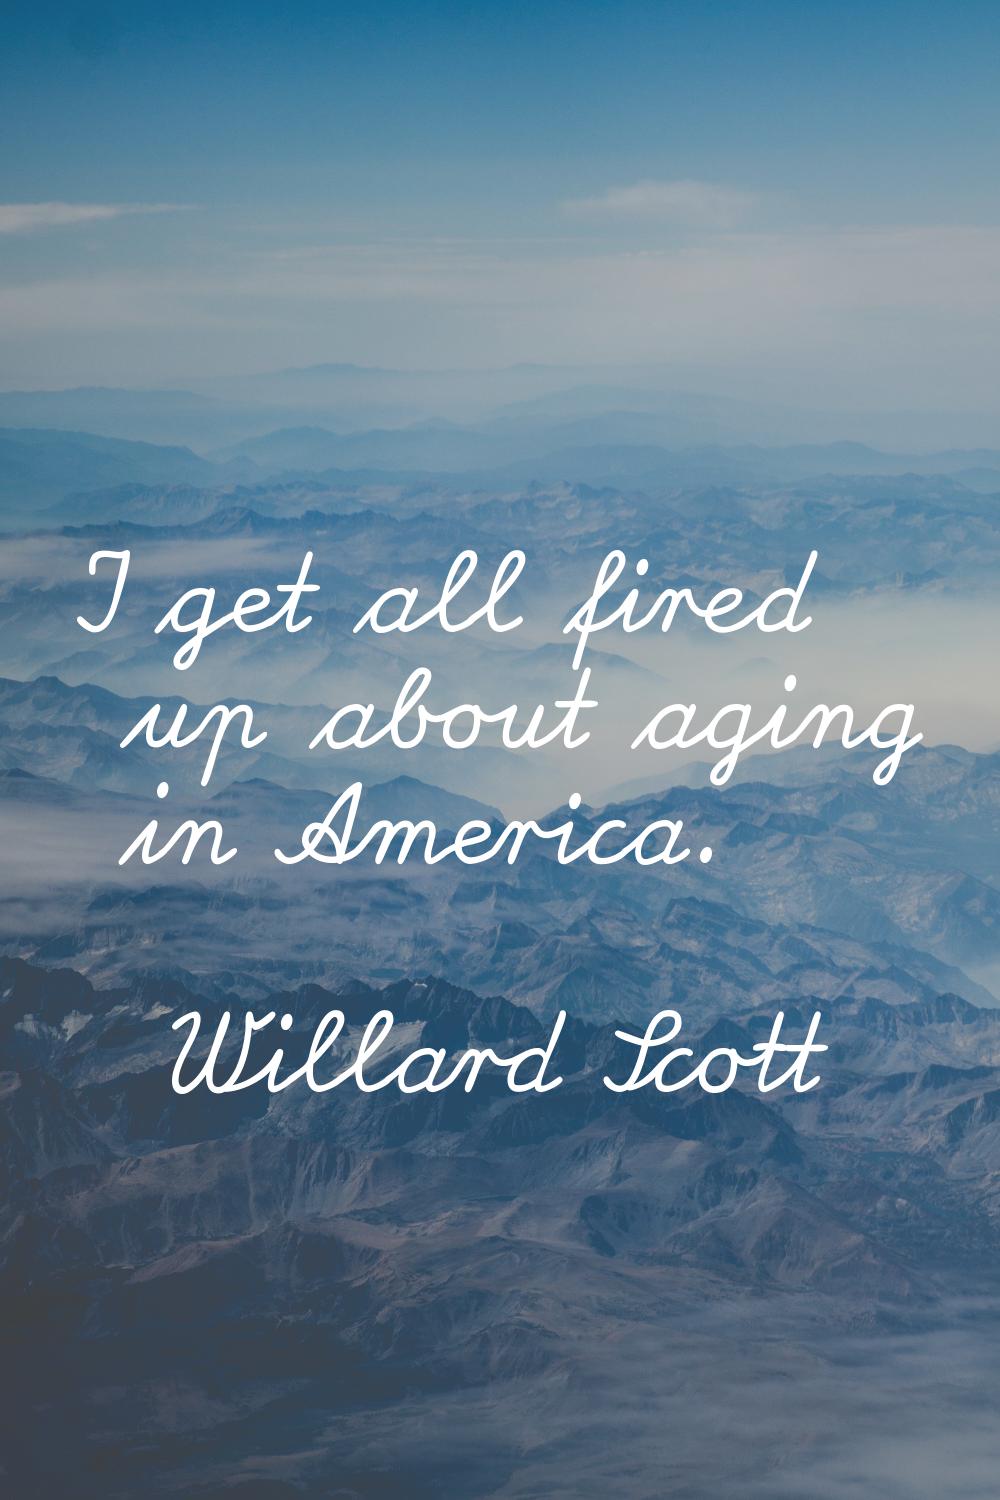 I get all fired up about aging in America.